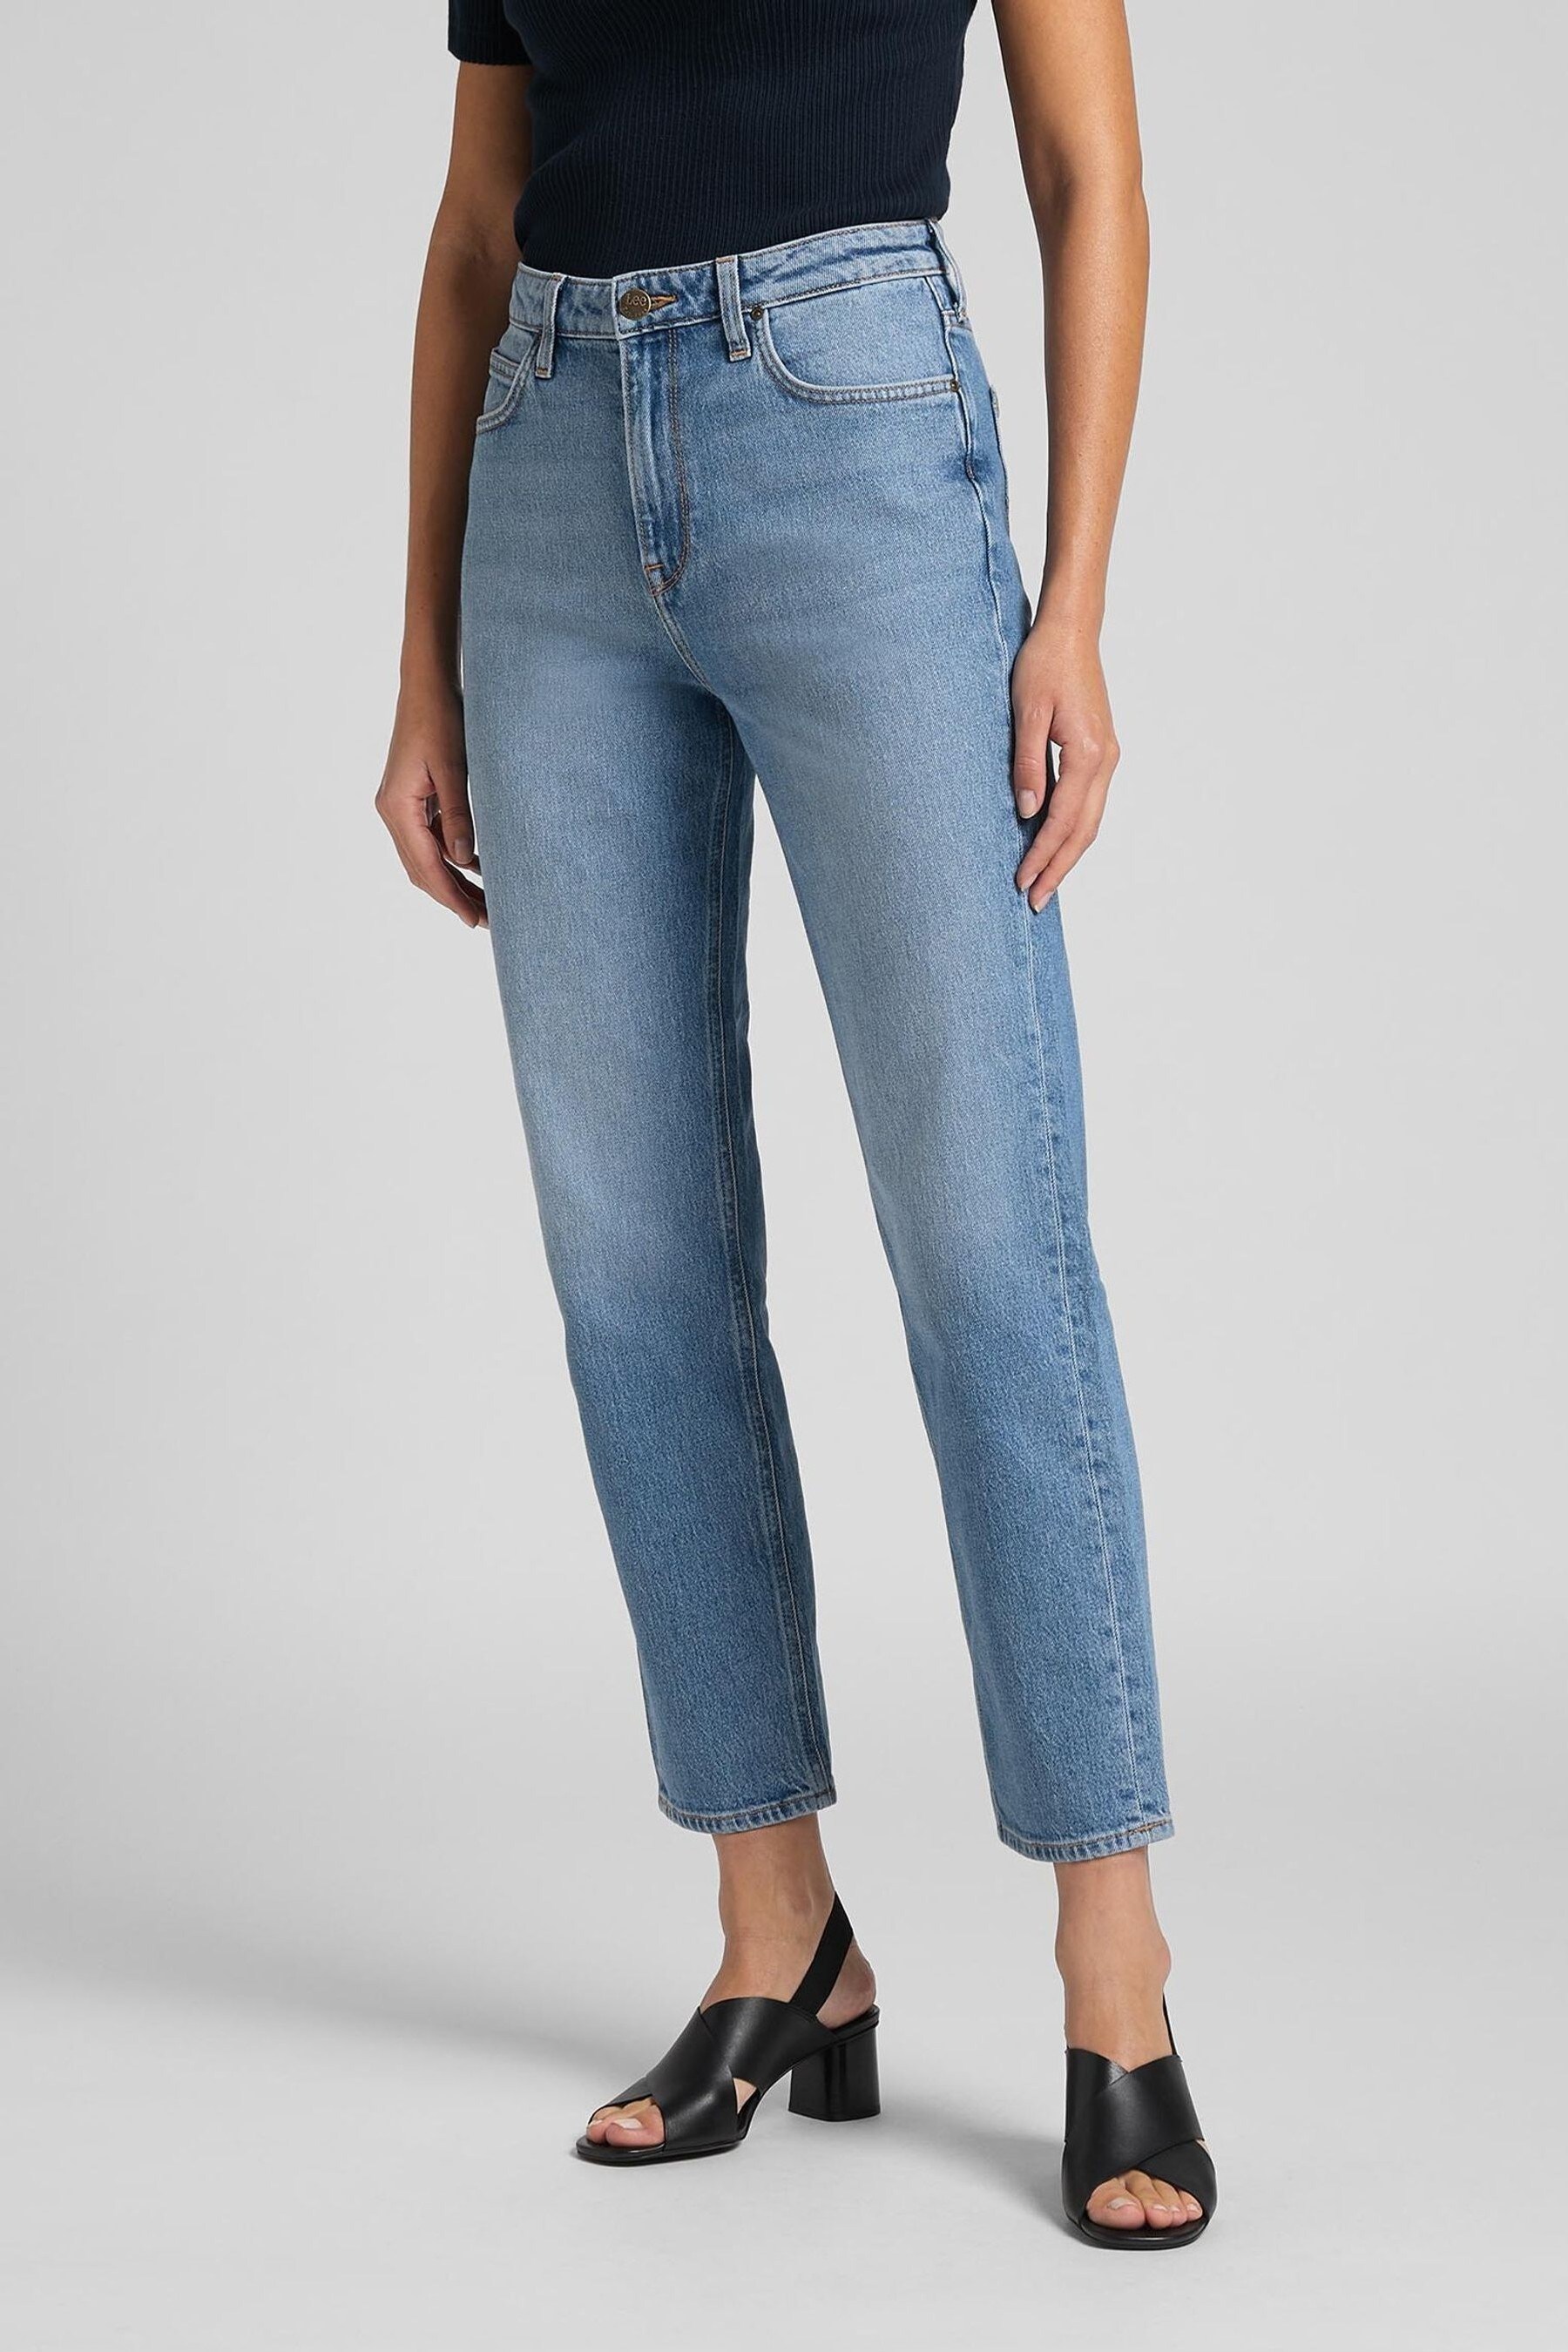 Buy Lee Carol Cropped Straight Fit Jeans from the Next UK online shop